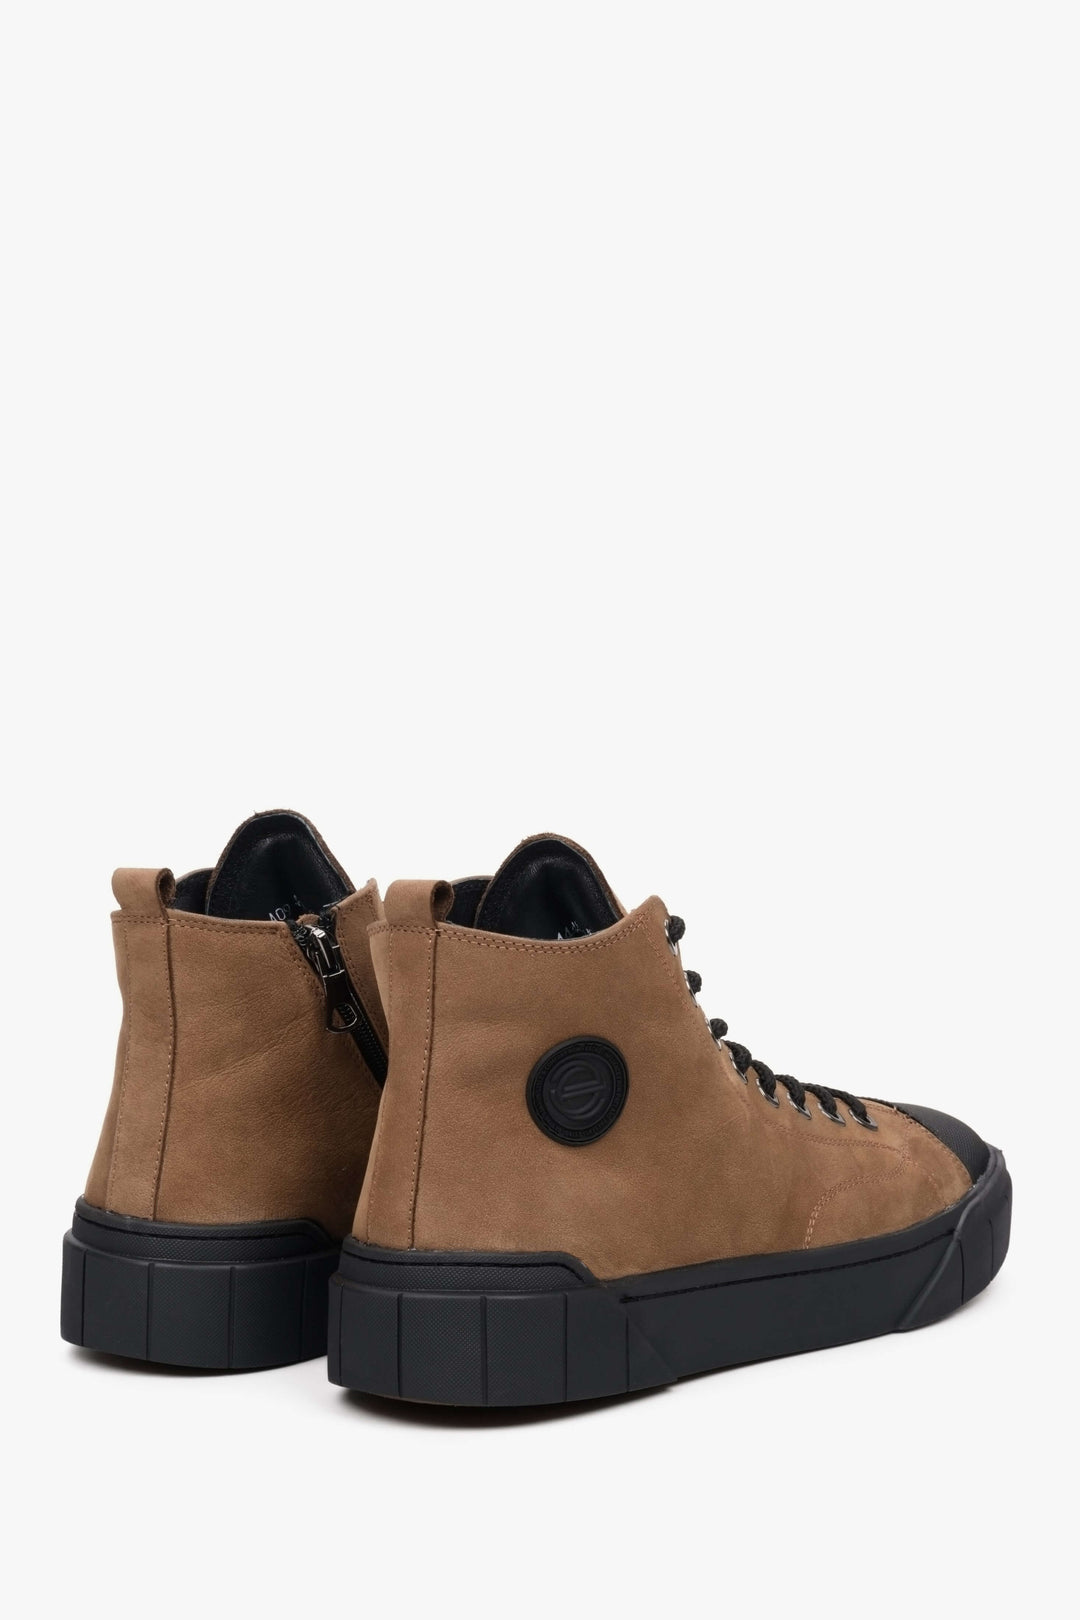 High-top brown men's lace-up sneakers by Estro.